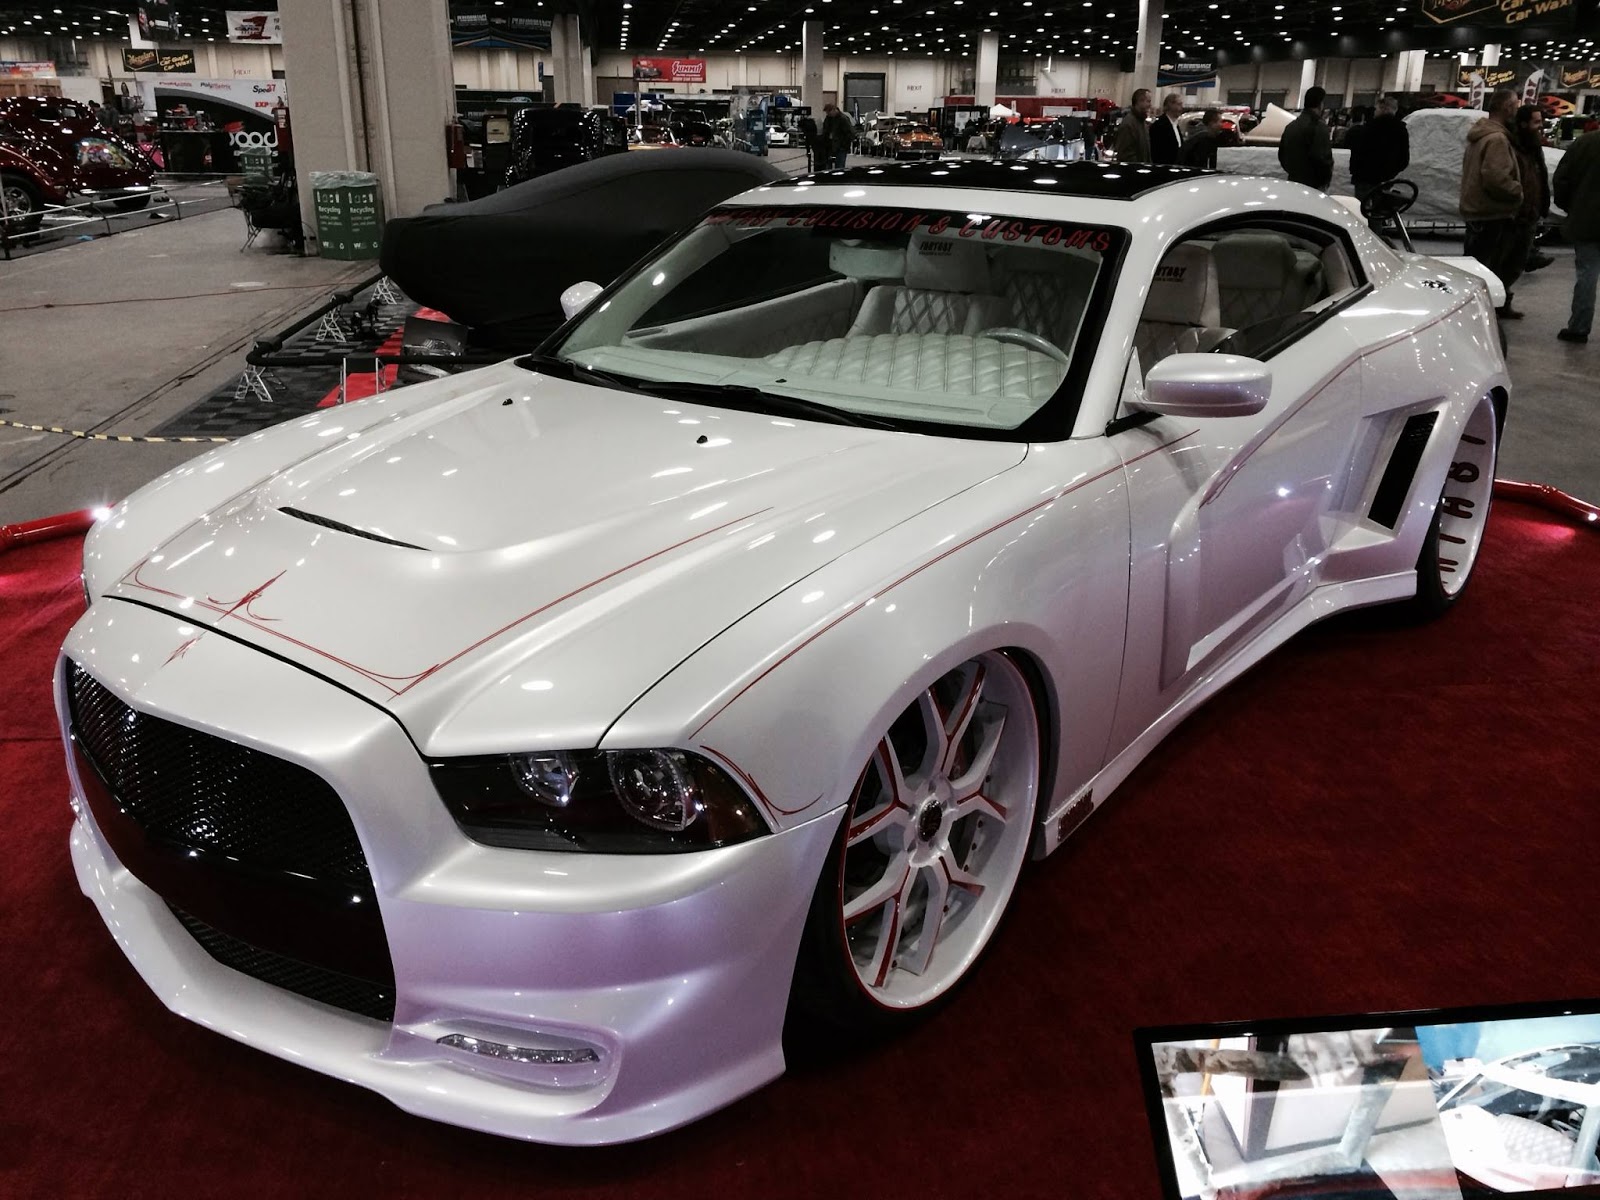 This One-Off Dodge Charger Coupe Conversion Is The Anti-Challenger [38